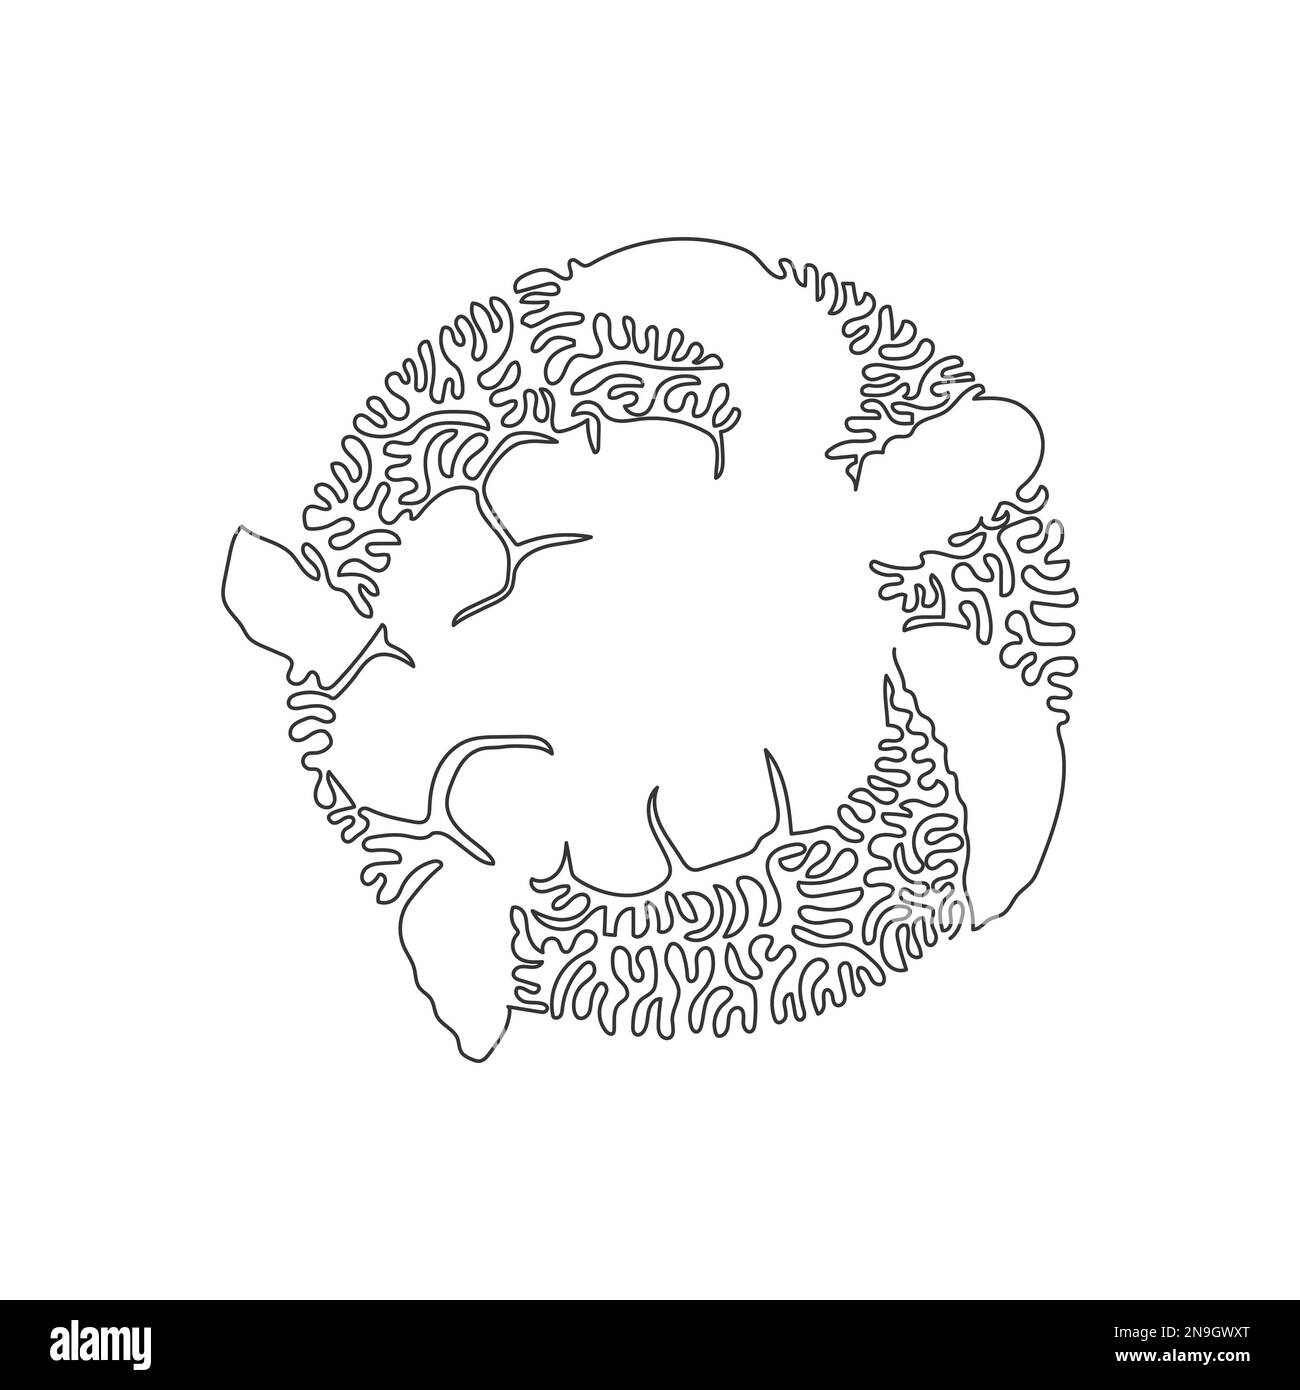 Single swirl continuous line drawing of beautiful turtles abstract art. Continuous line drawing design vector illustration style of friendly turtle Stock Vector